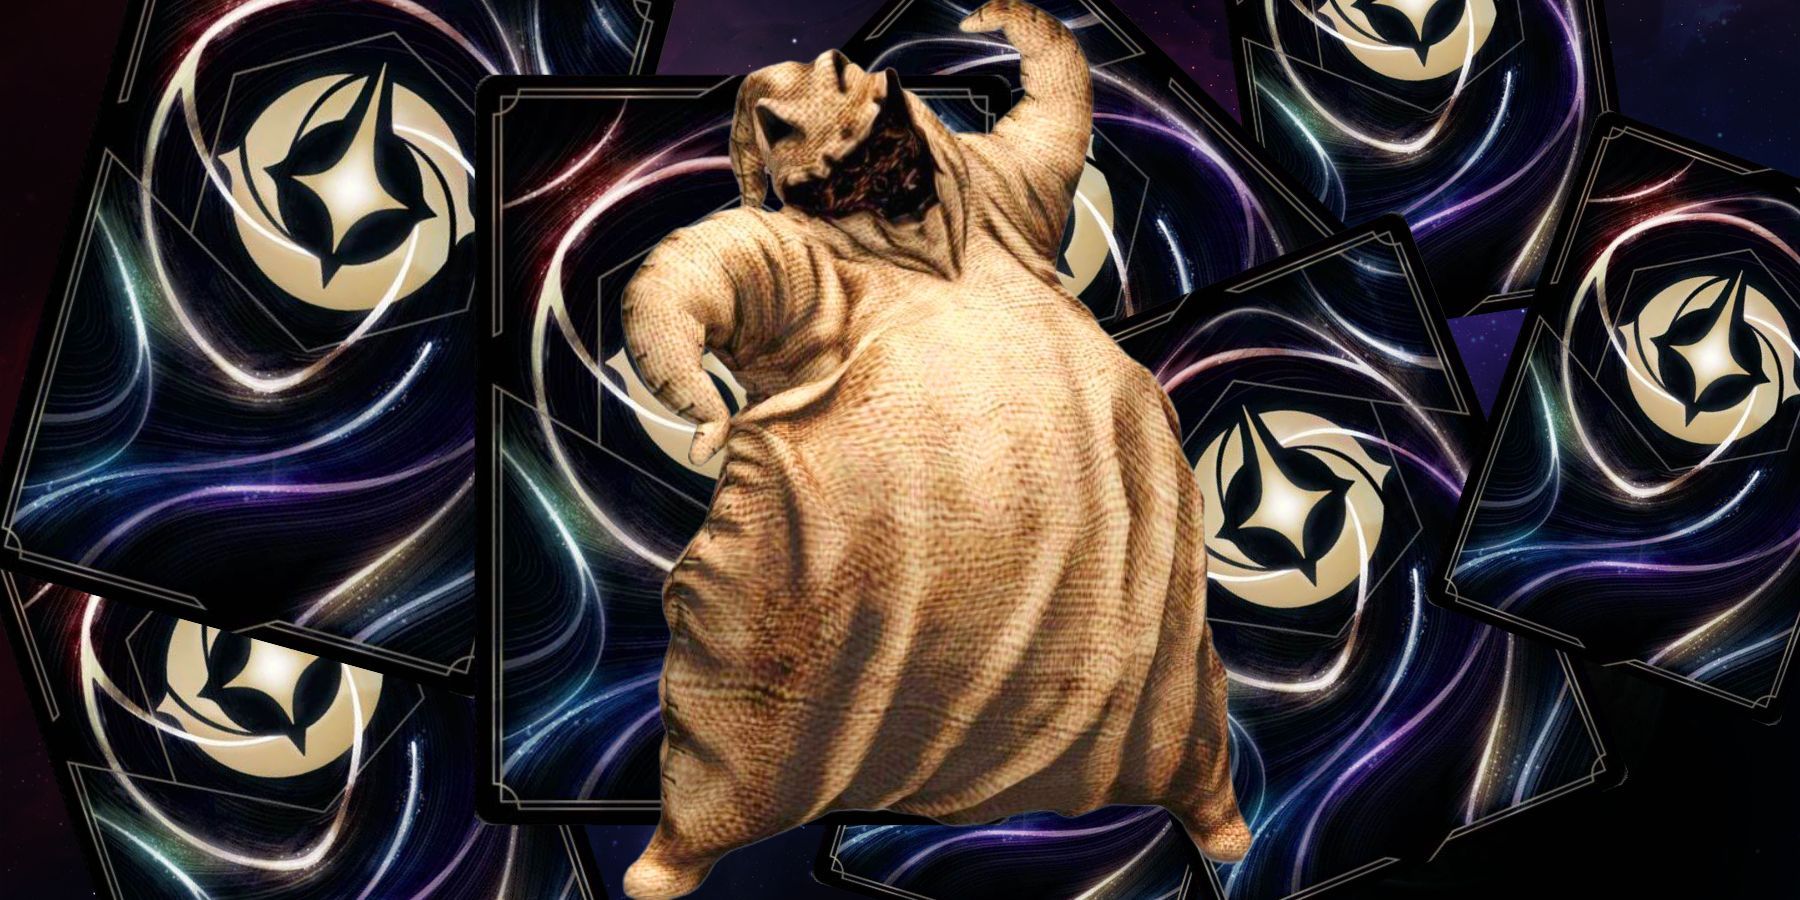 Oogie Boogie in front of some Lorcana card backs